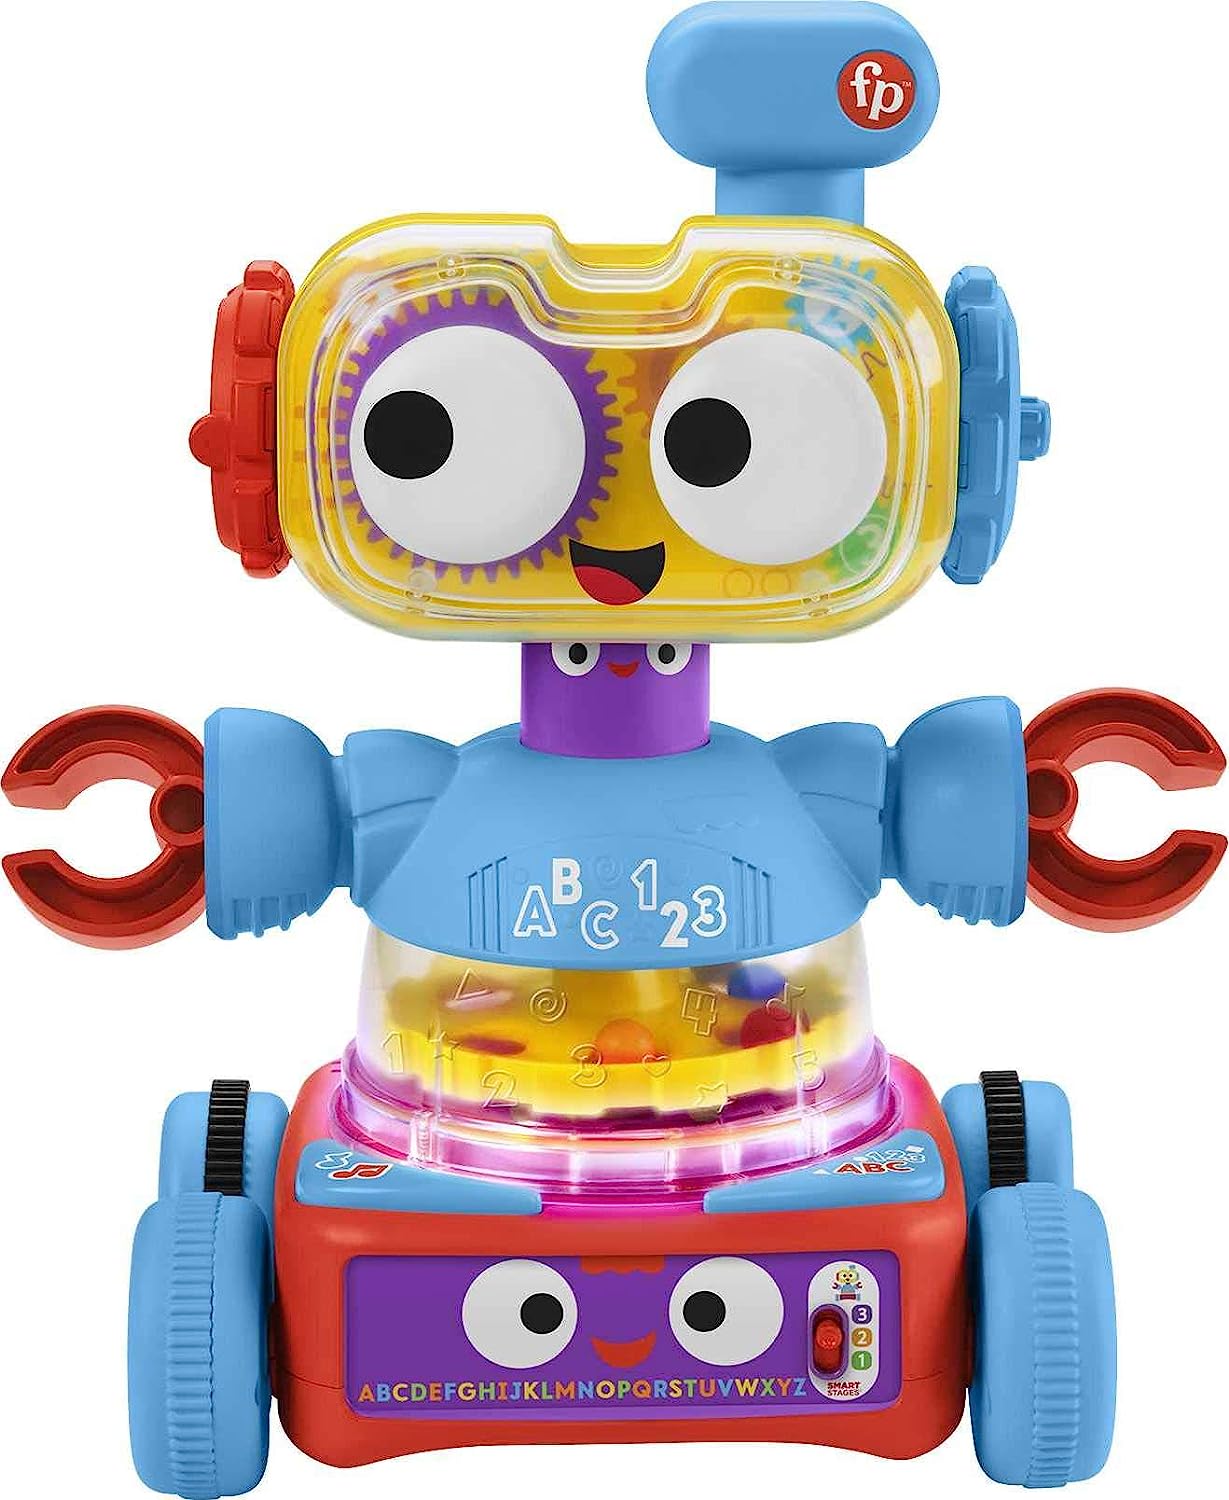 New Fisher-Price 4-in-1 Ultimate Learning Bot Learning Toy